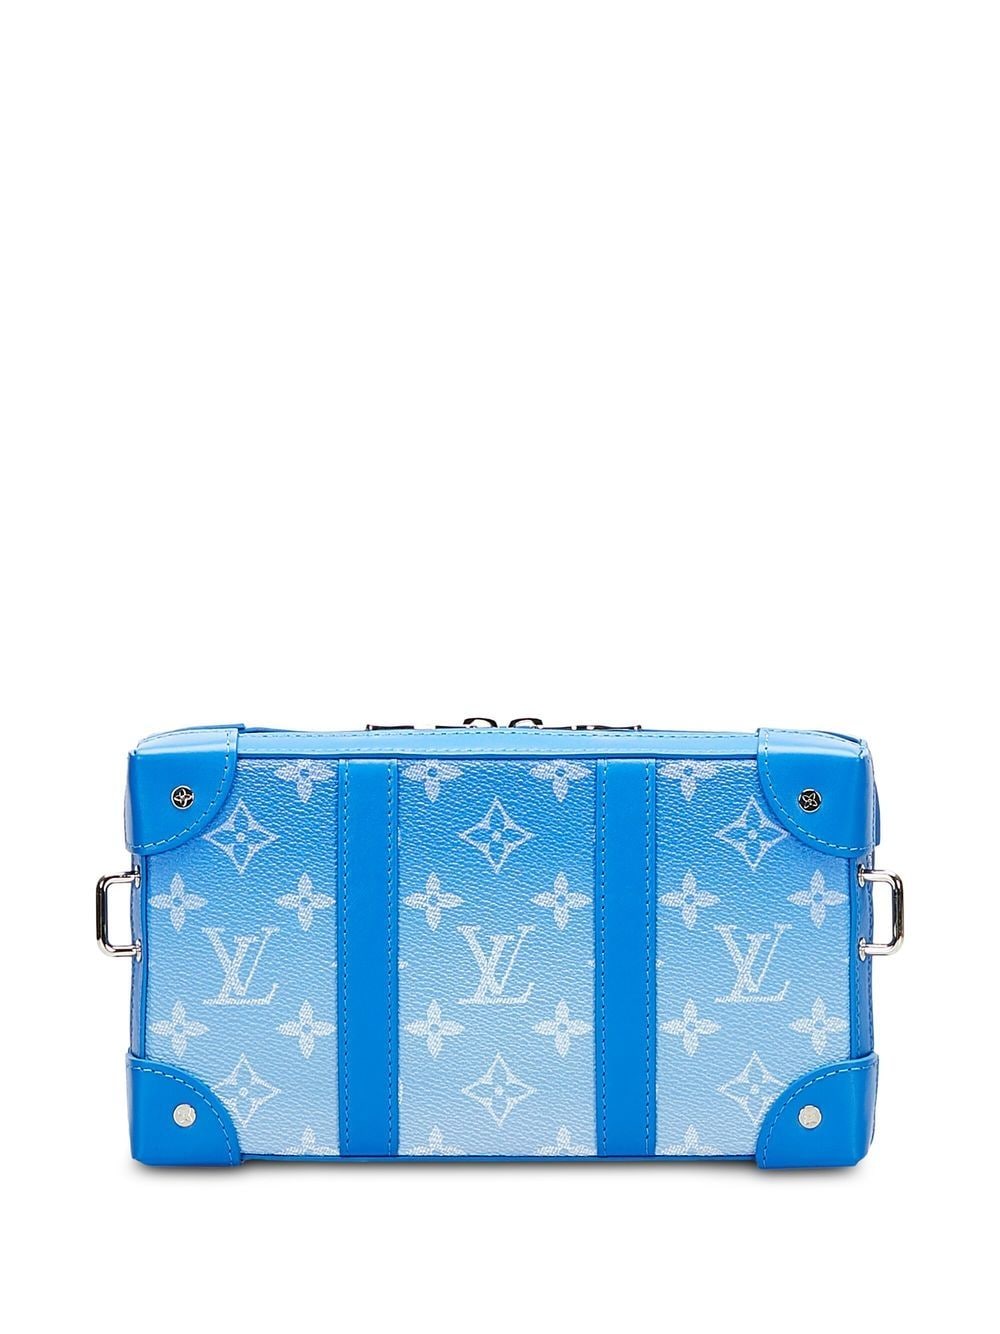 Pre-owned Used Louis Vuitton LV Brazza Long Wallet Monogram Cloud